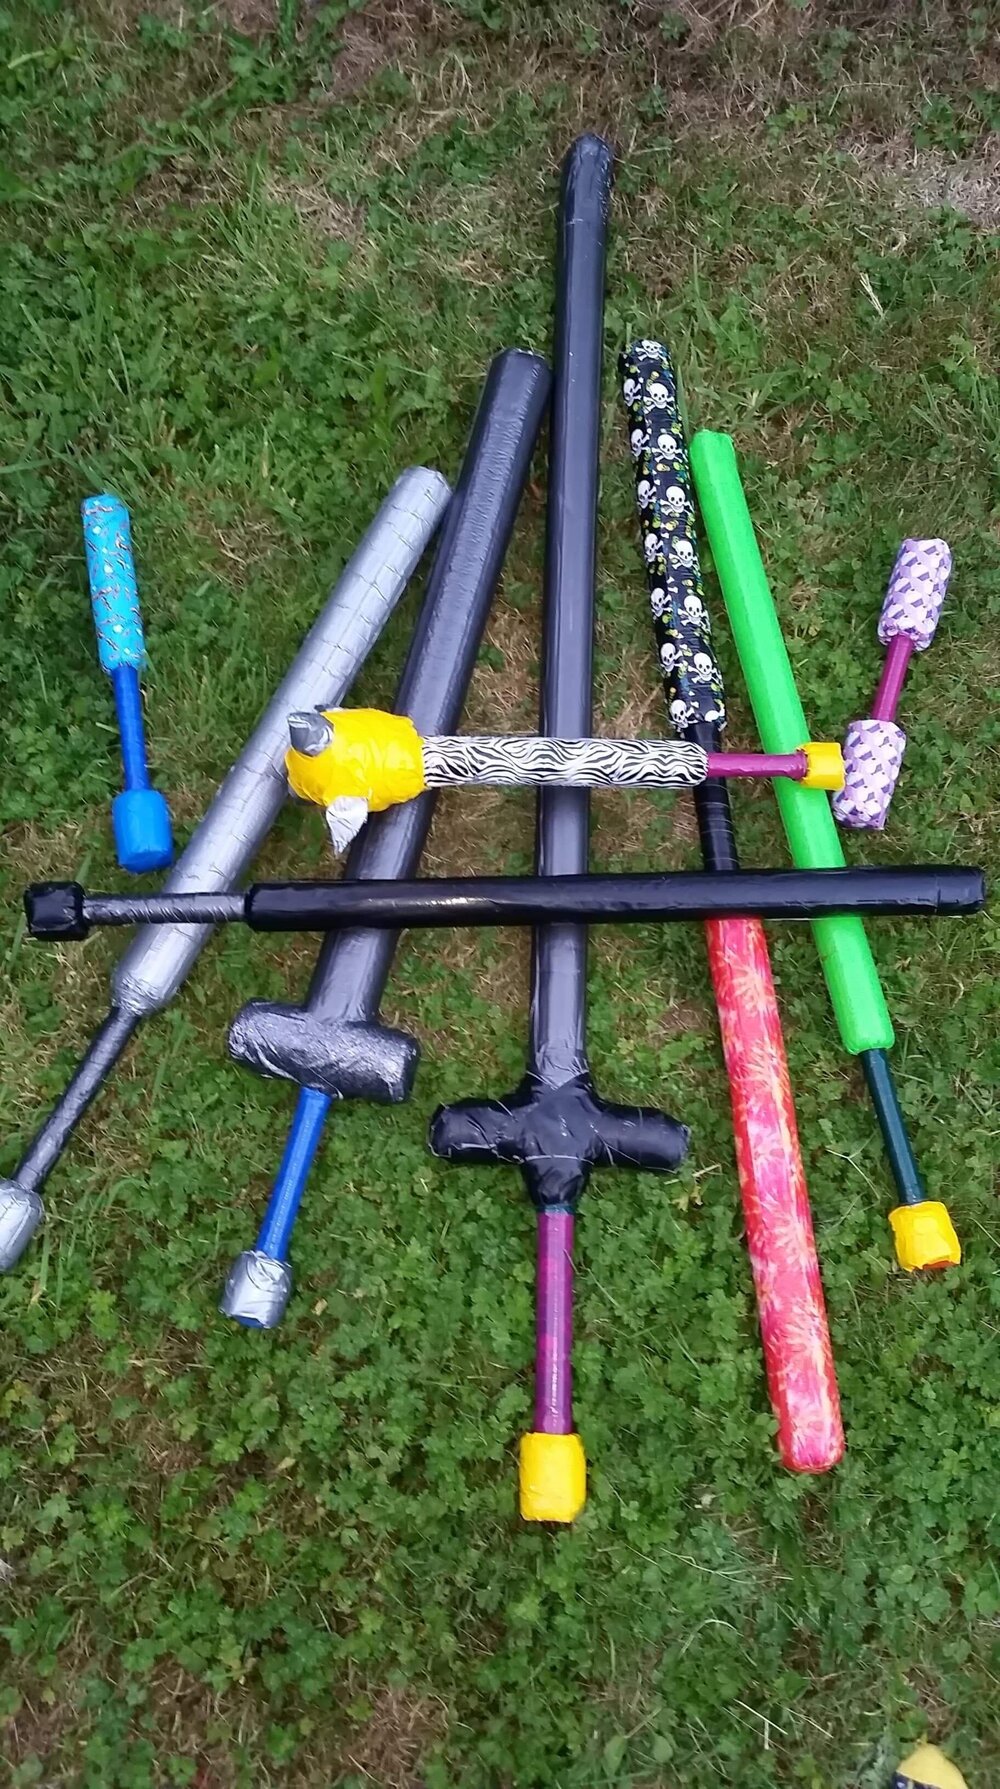 Nine duct-taped boffer swords of various lengths and colors lie in a pile on a grass lawn. 